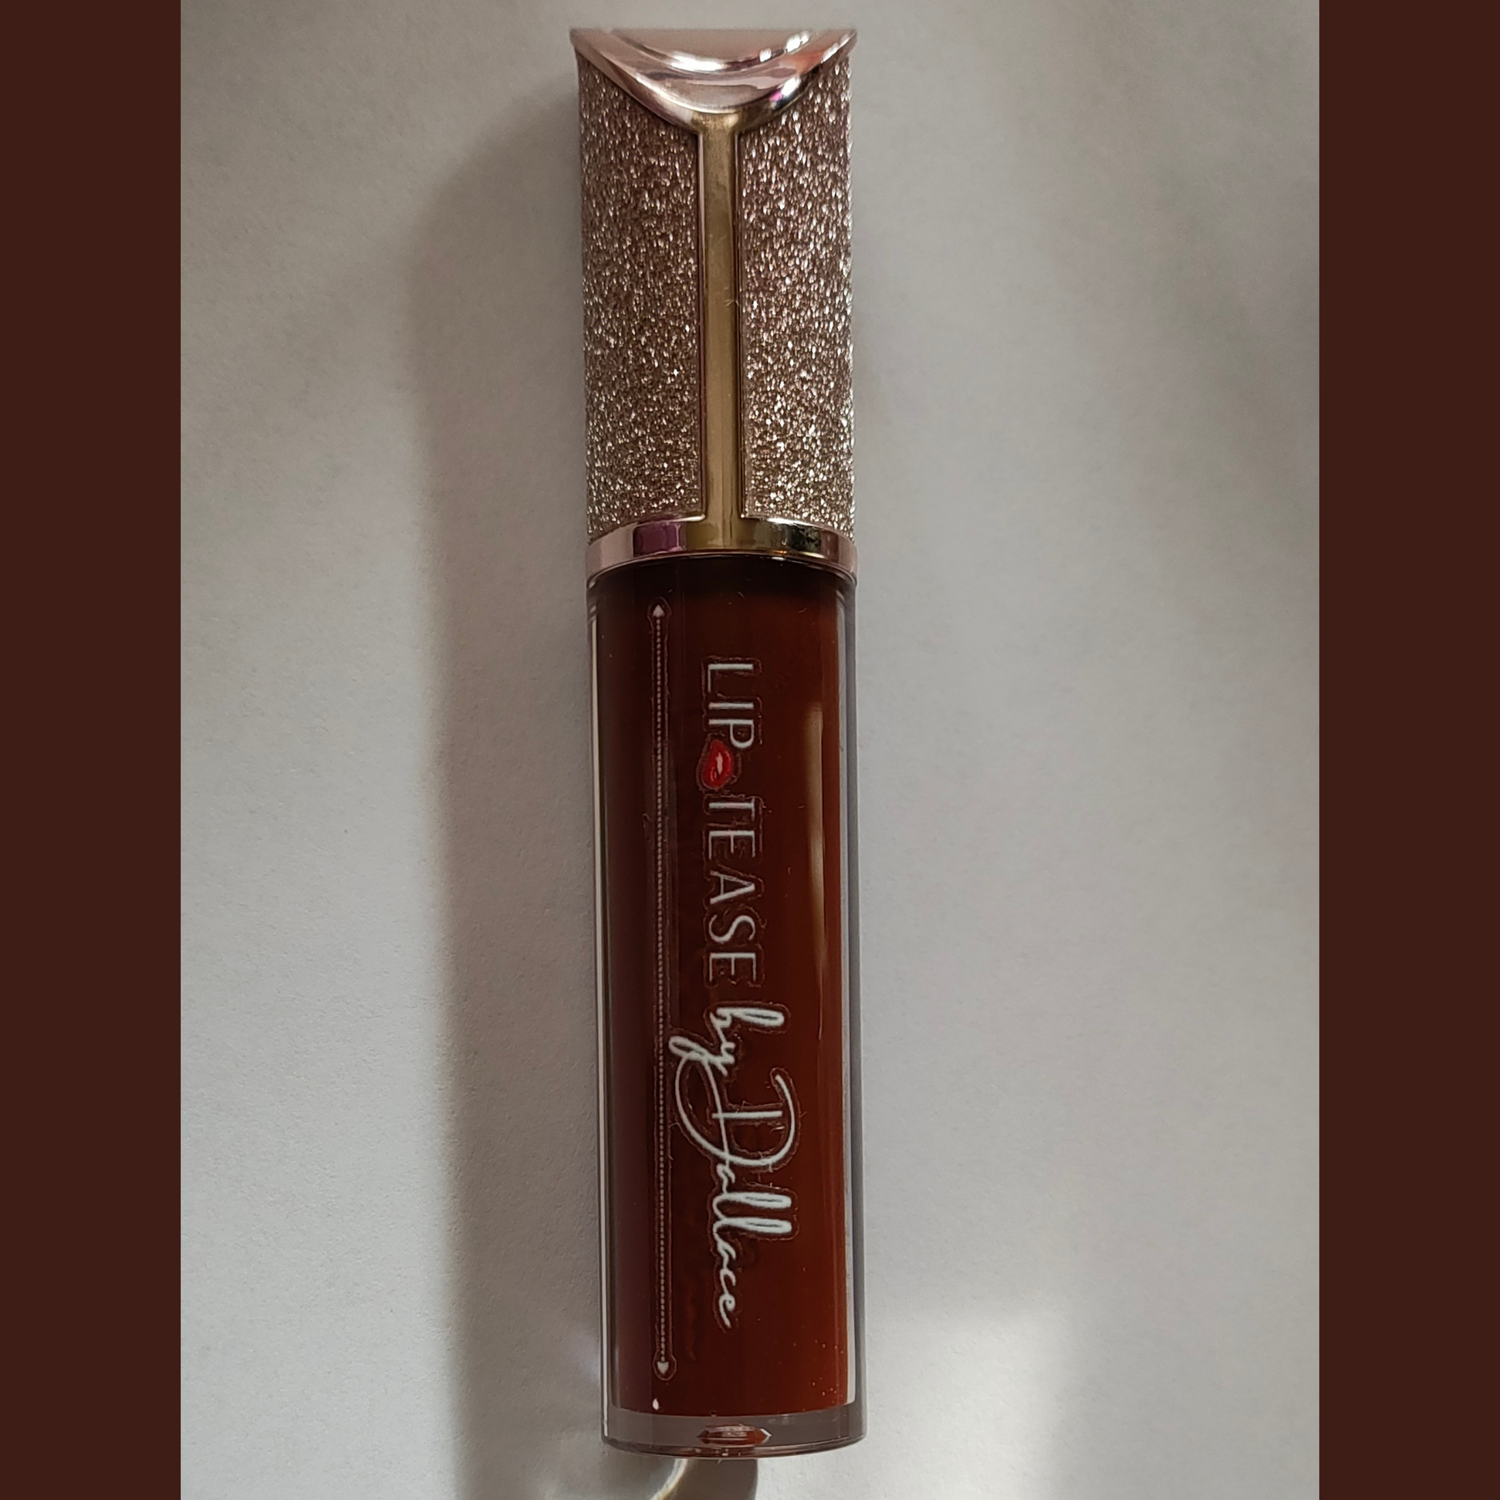 Color Change Pigmented Gloss Lip Gloss Lip Tease by Dallace Chocolate-Strawberry  